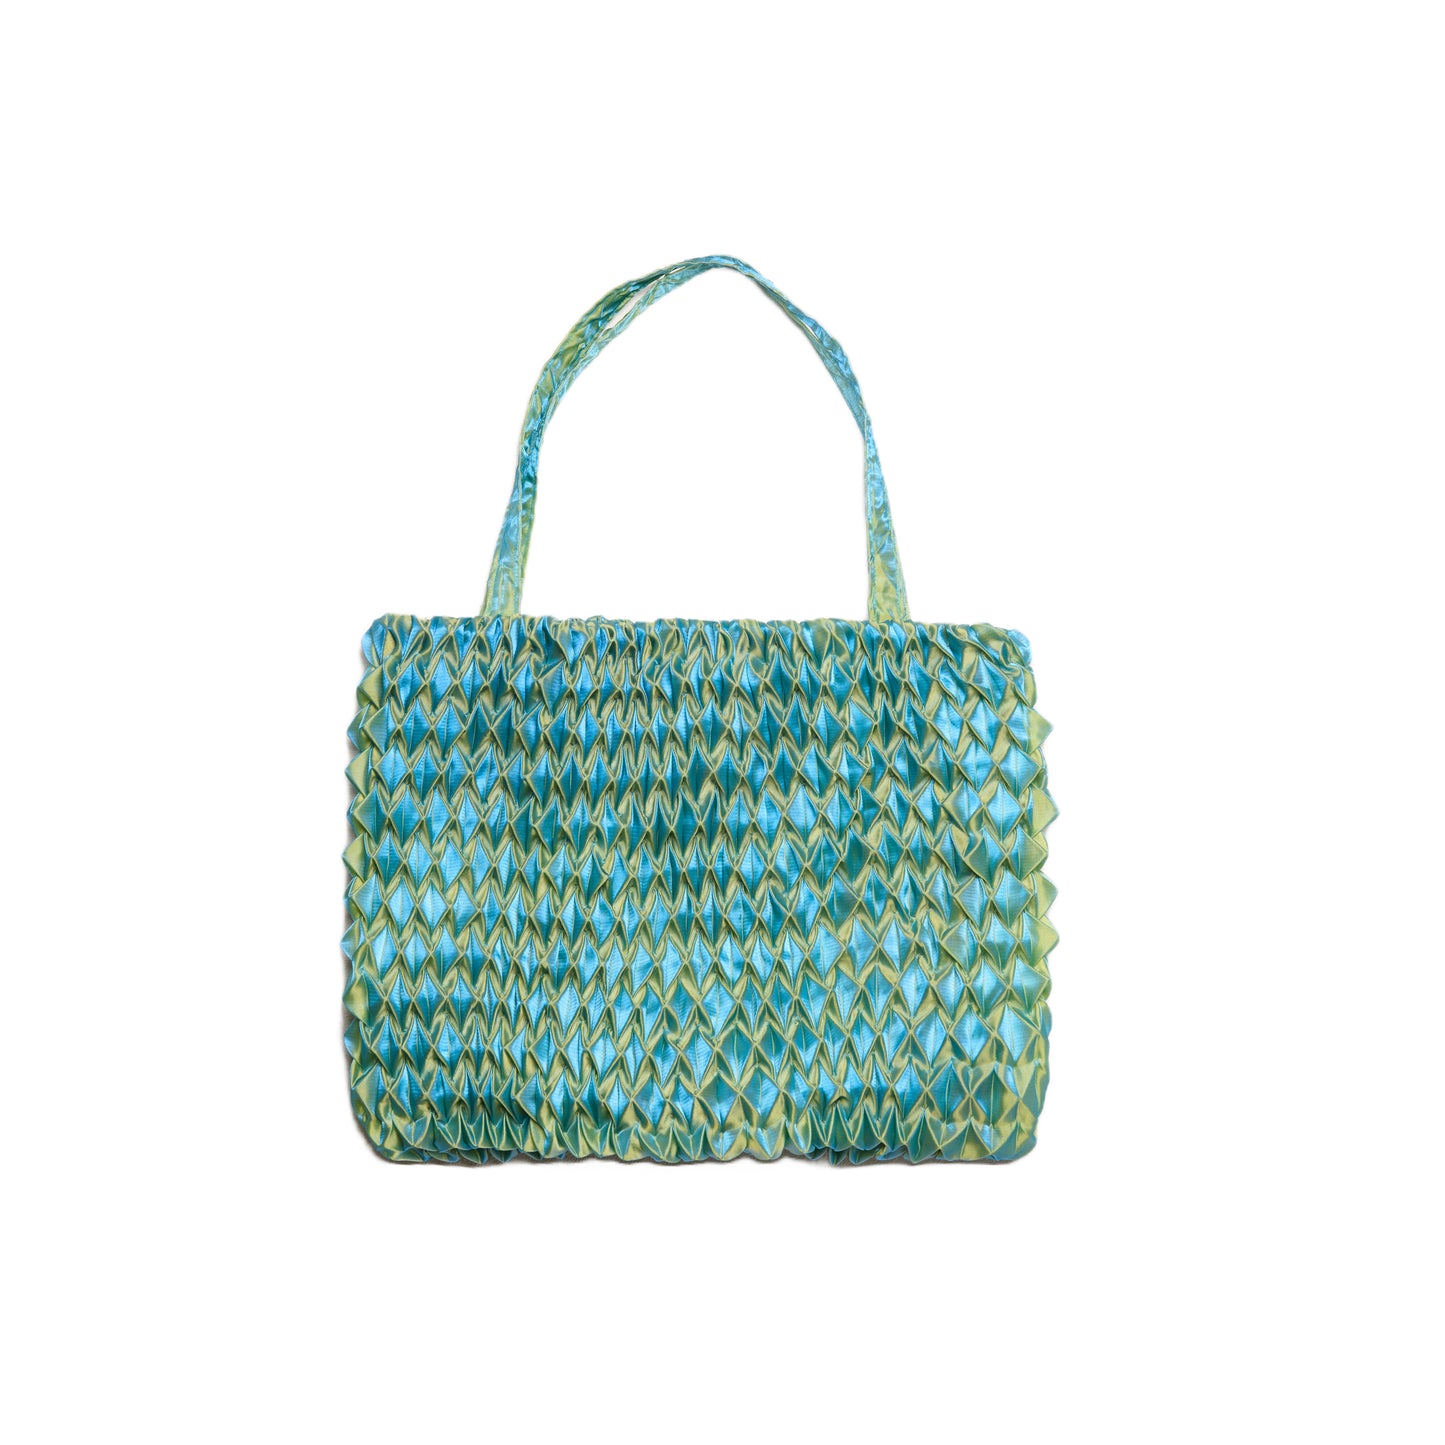 The Vision Pleated Bag